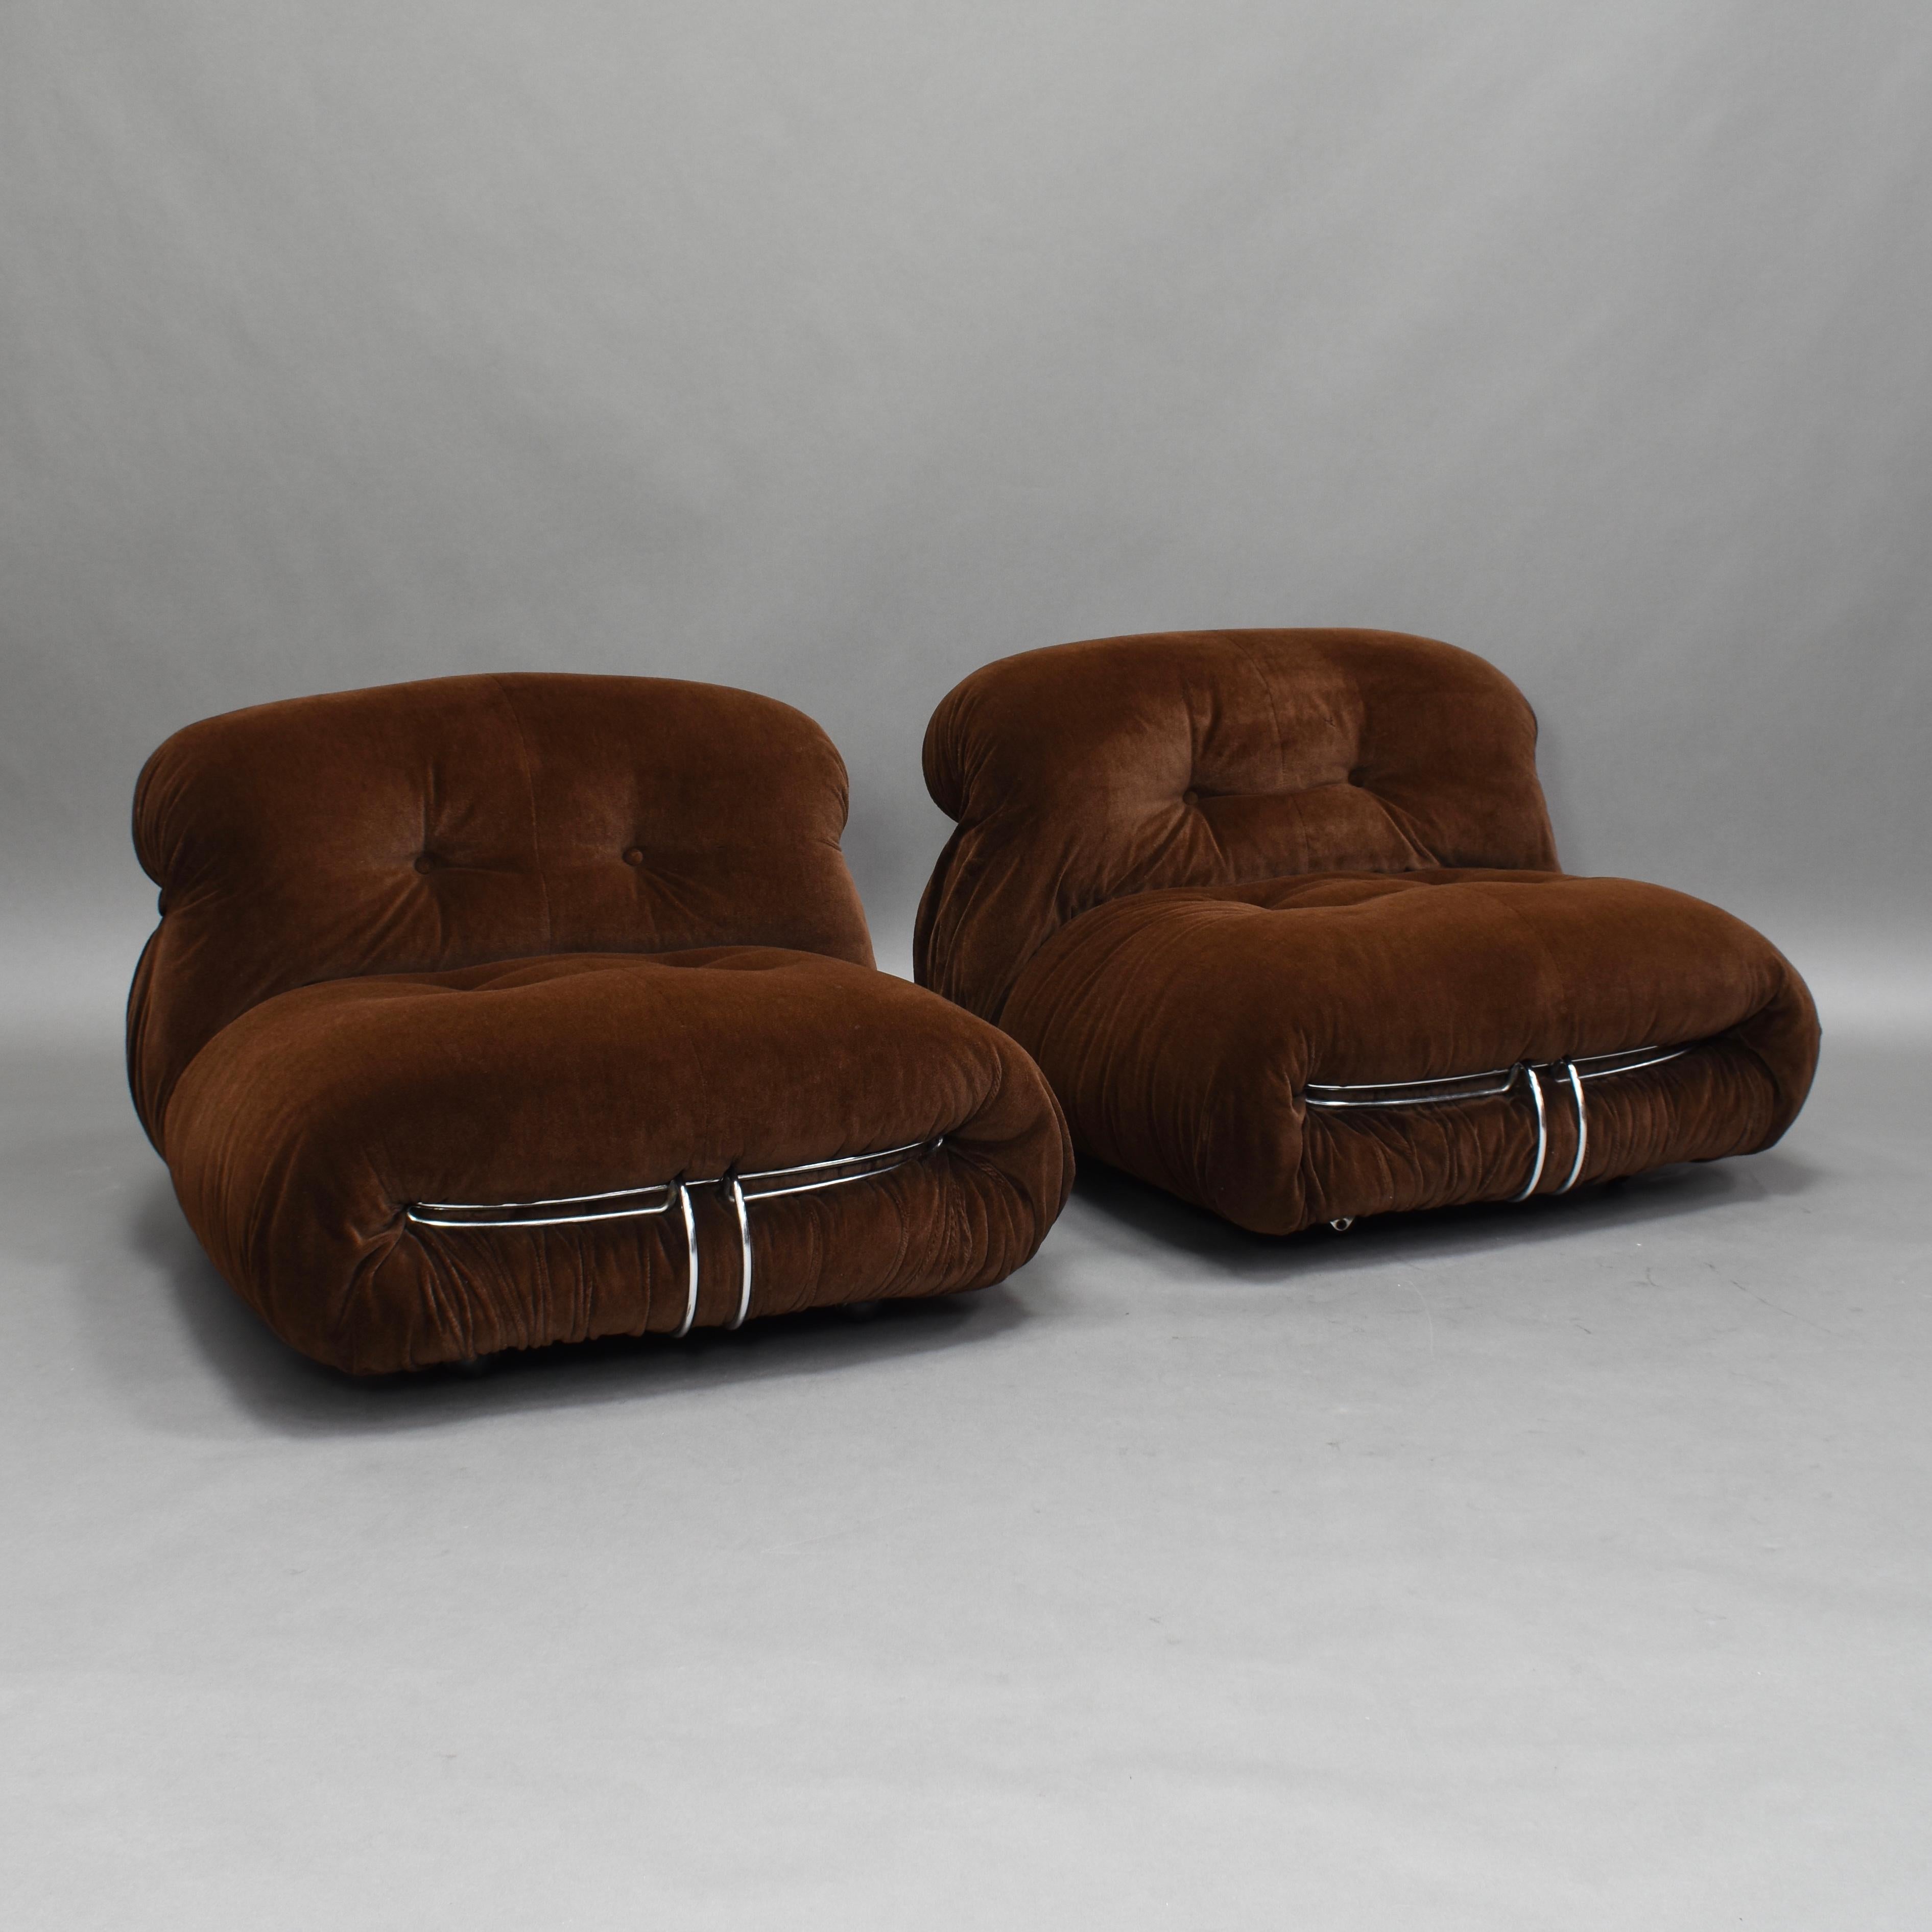 Late 20th Century Pair of Soriana Chairs in Brown Mohair Velvet by Afra & Tobia Scarpa for Cassina